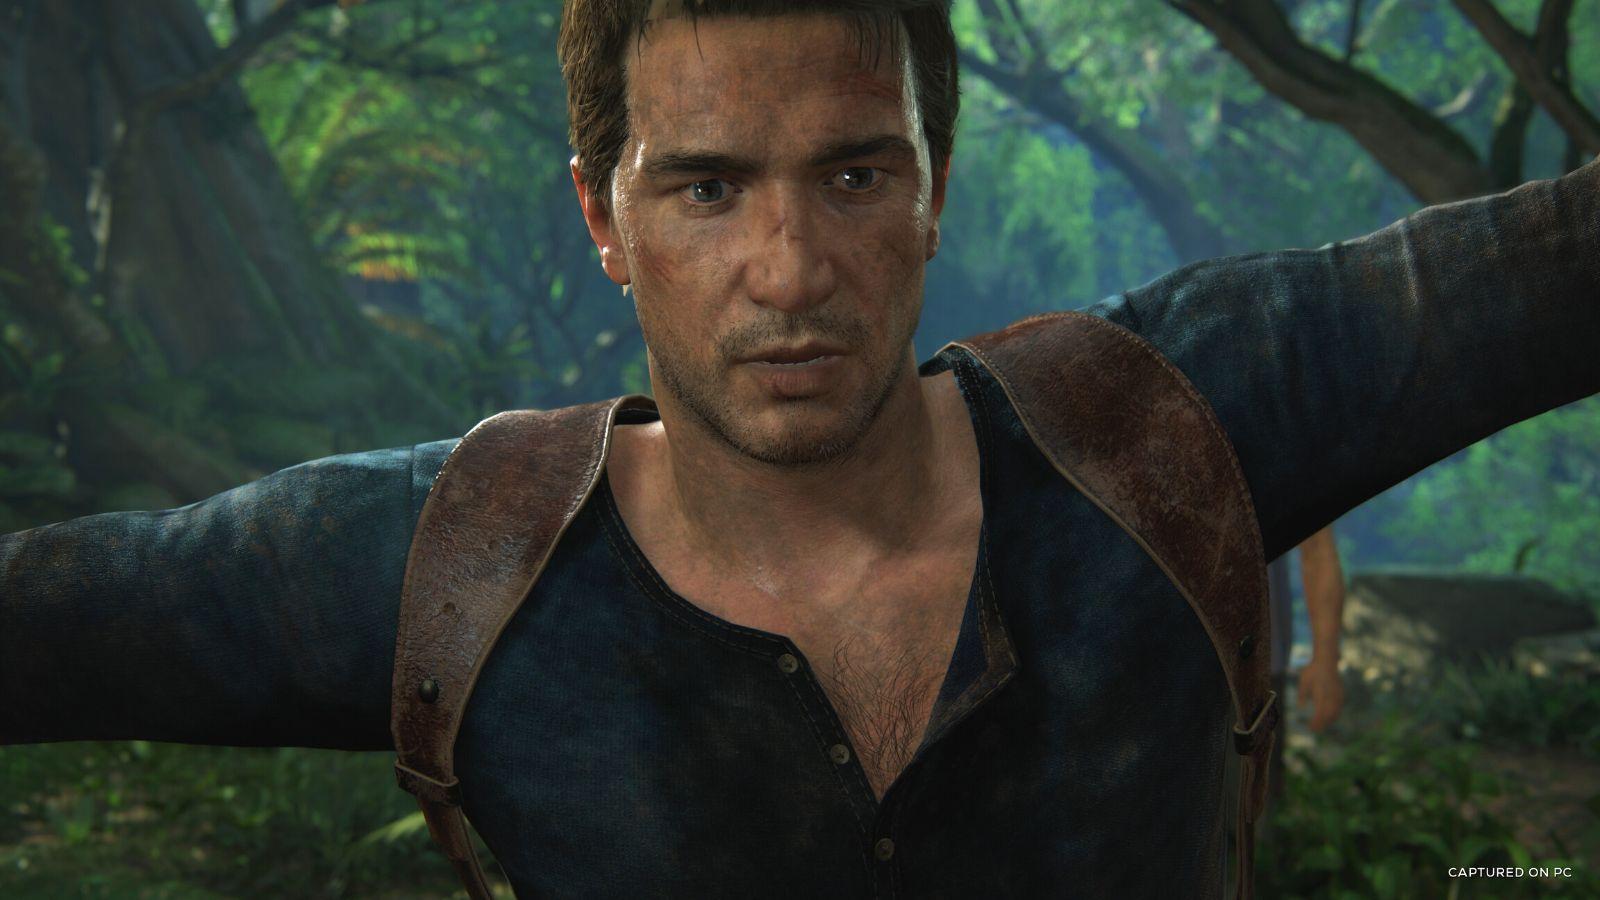 Uncharted 4 is coming to PC, according to recent Sony IR document